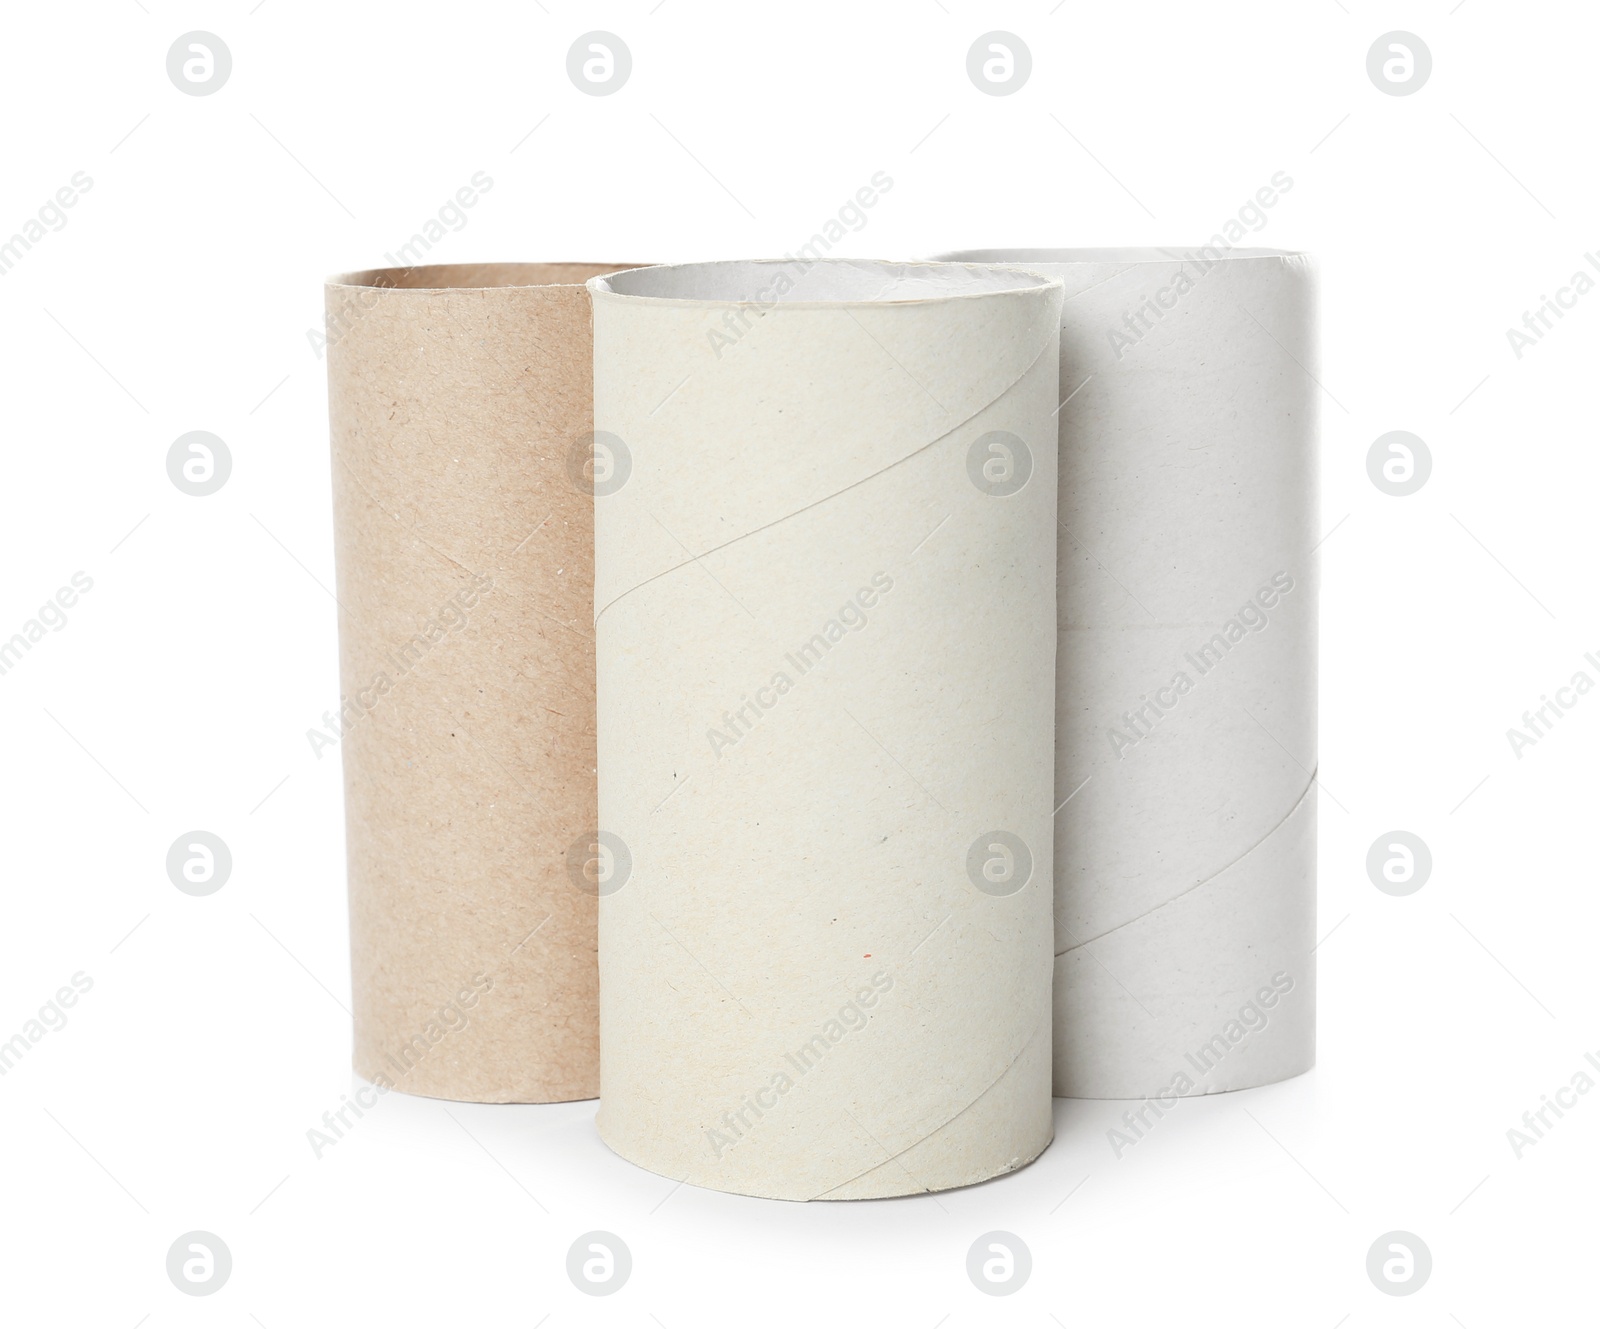 Photo of Empty toilet paper rolls on white background